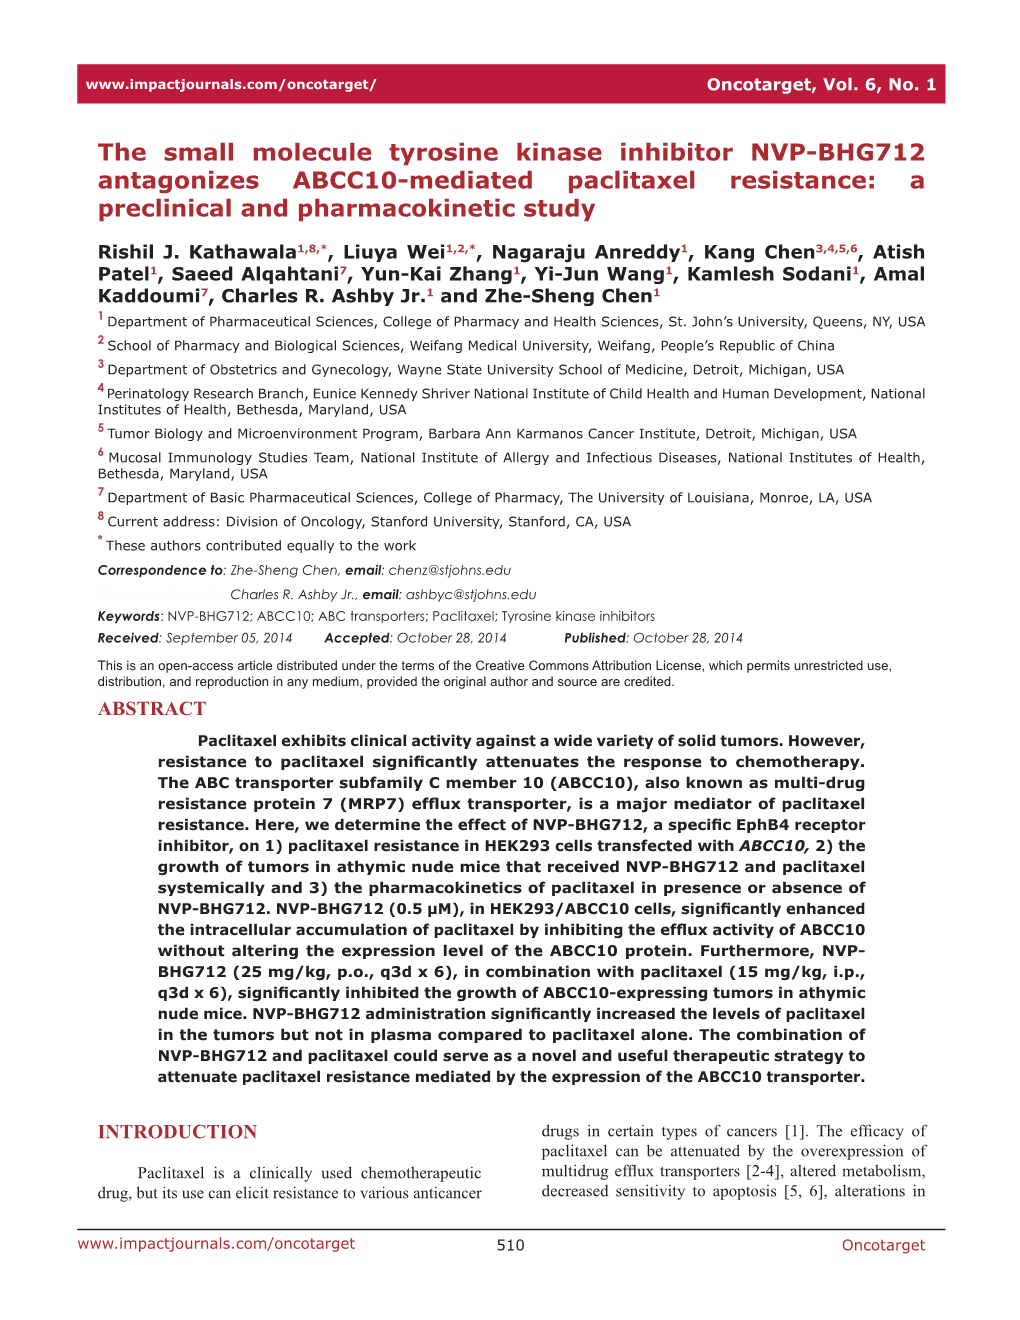 The Small Molecule Tyrosine Kinase Inhibitor NVP-BHG712 Antagonizes ABCC10-Mediated Paclitaxel Resistance: a Preclinical and Pharmacokinetic Study